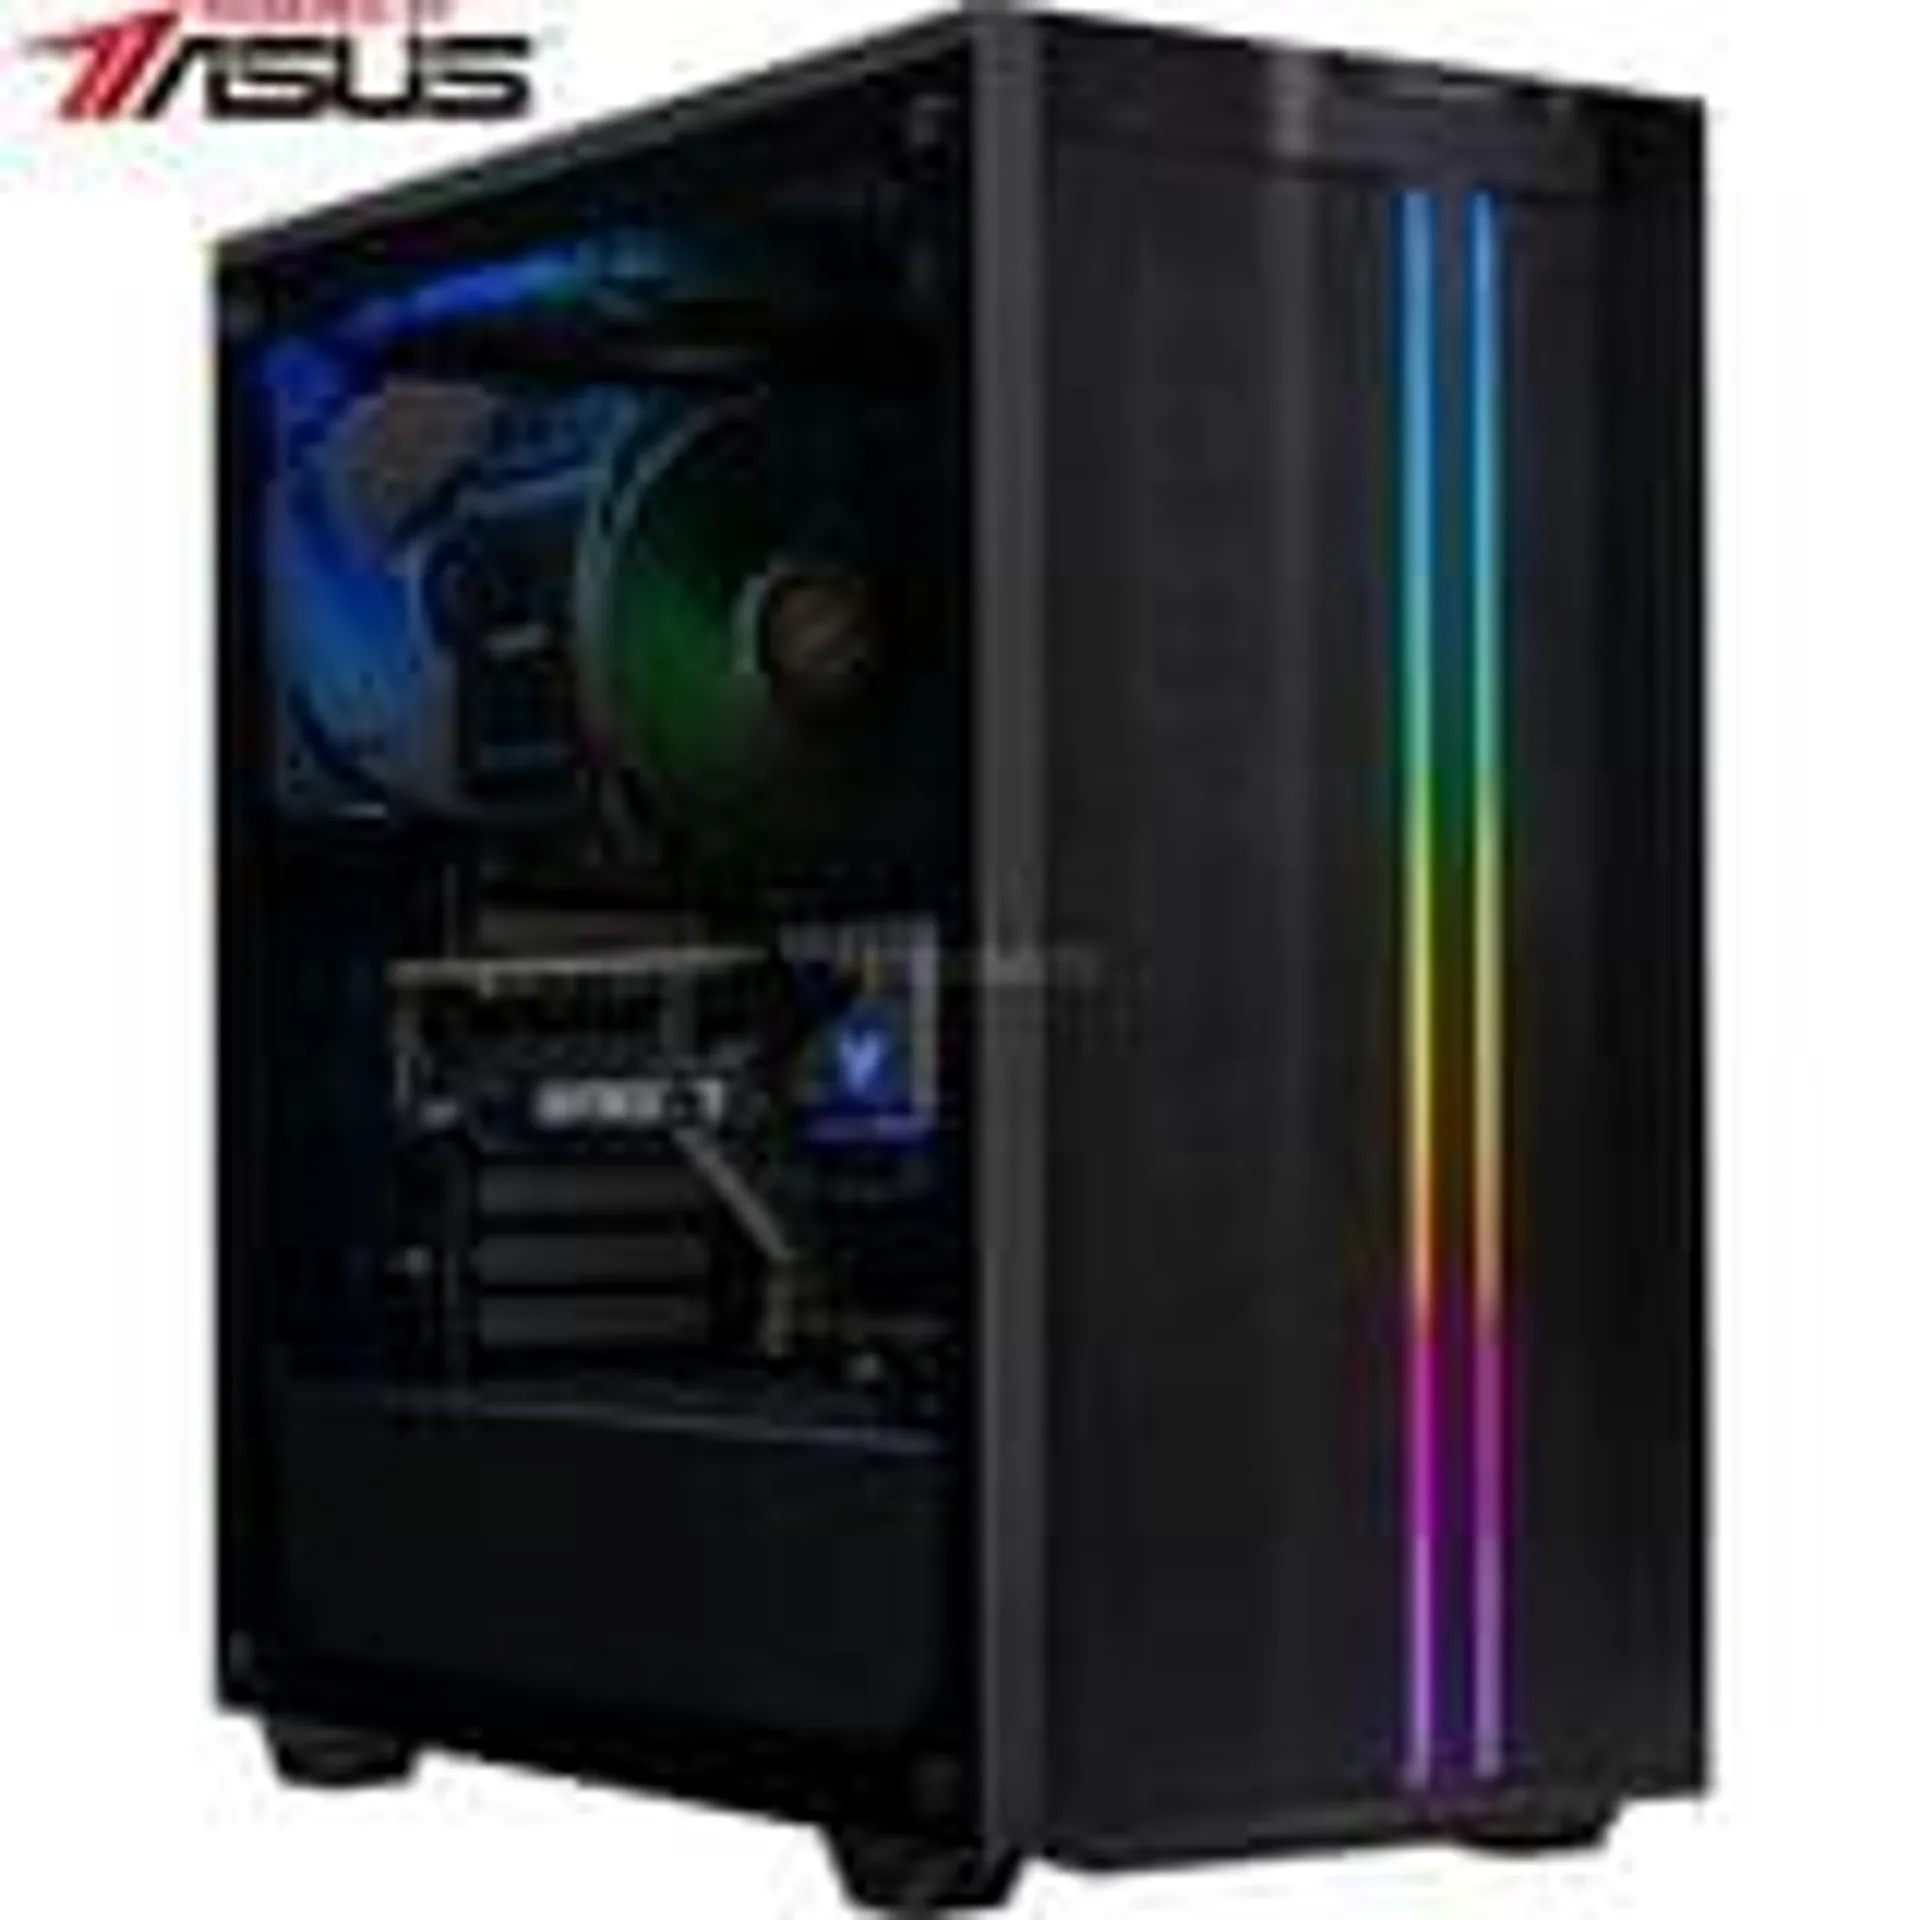 Powered by ASUS TUF R7-4090 gaming pc